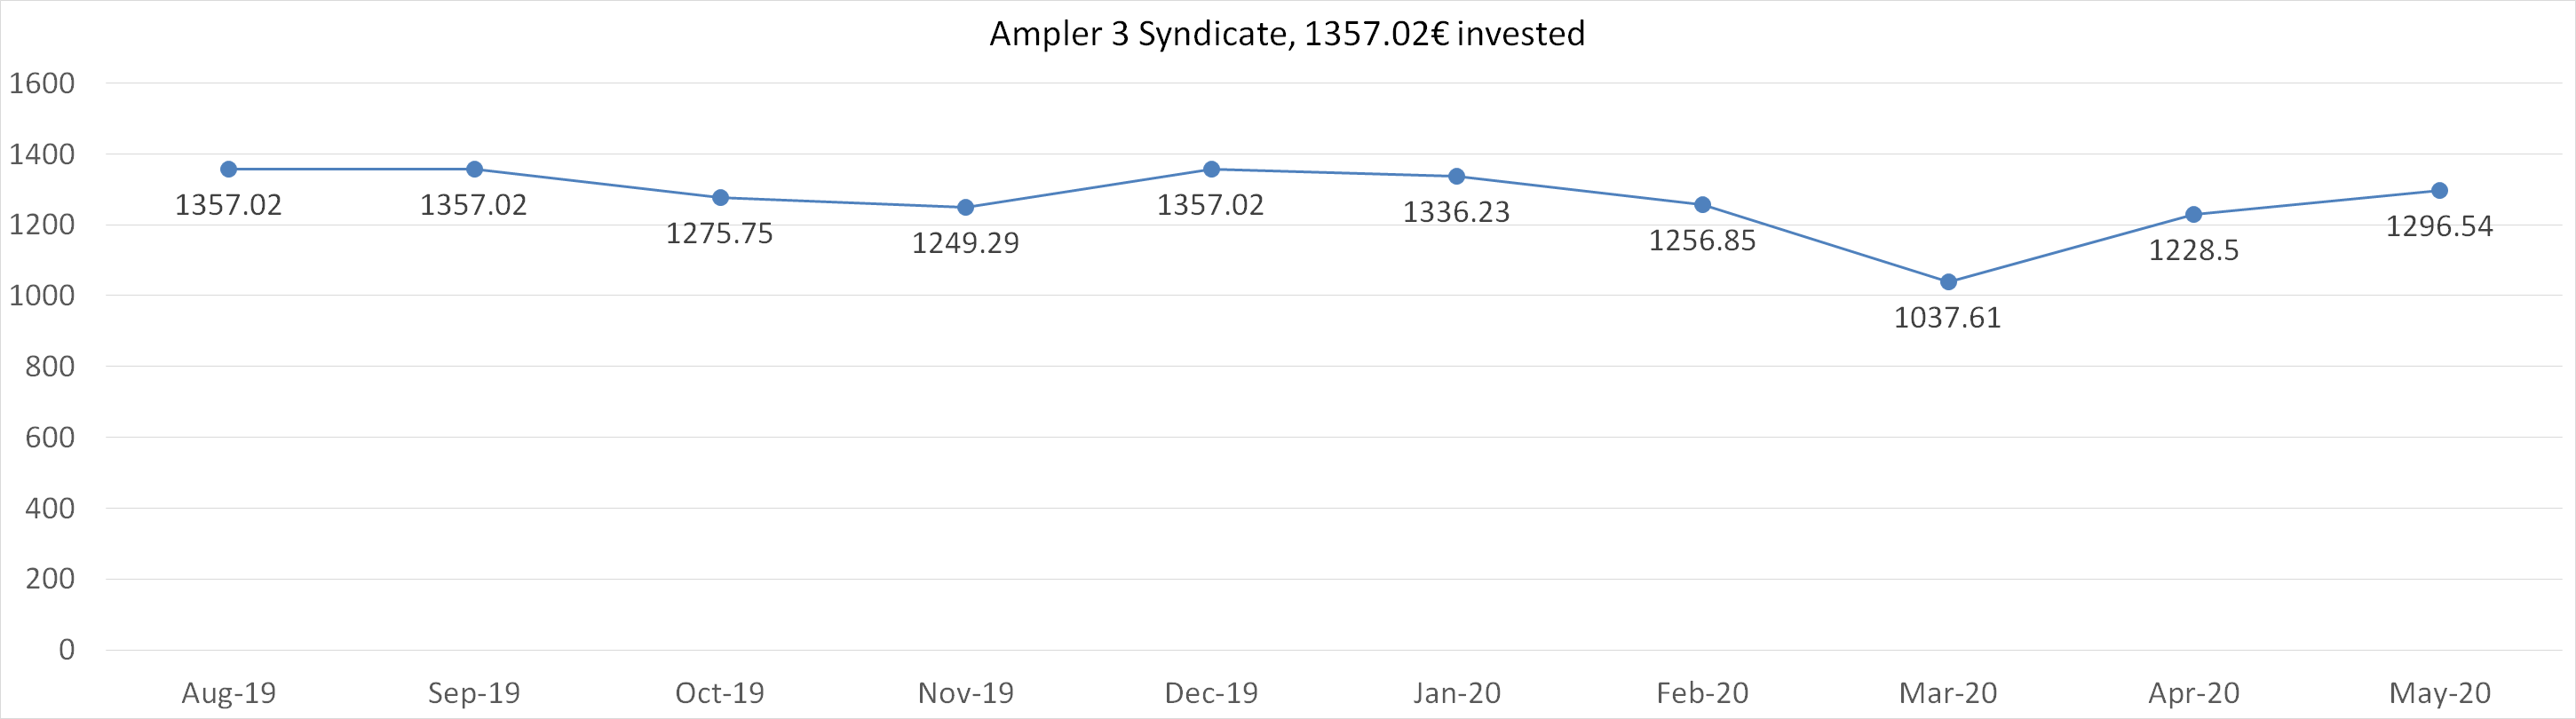 Ampler 3 syndicate, 1357,02 euros invested, may 2020